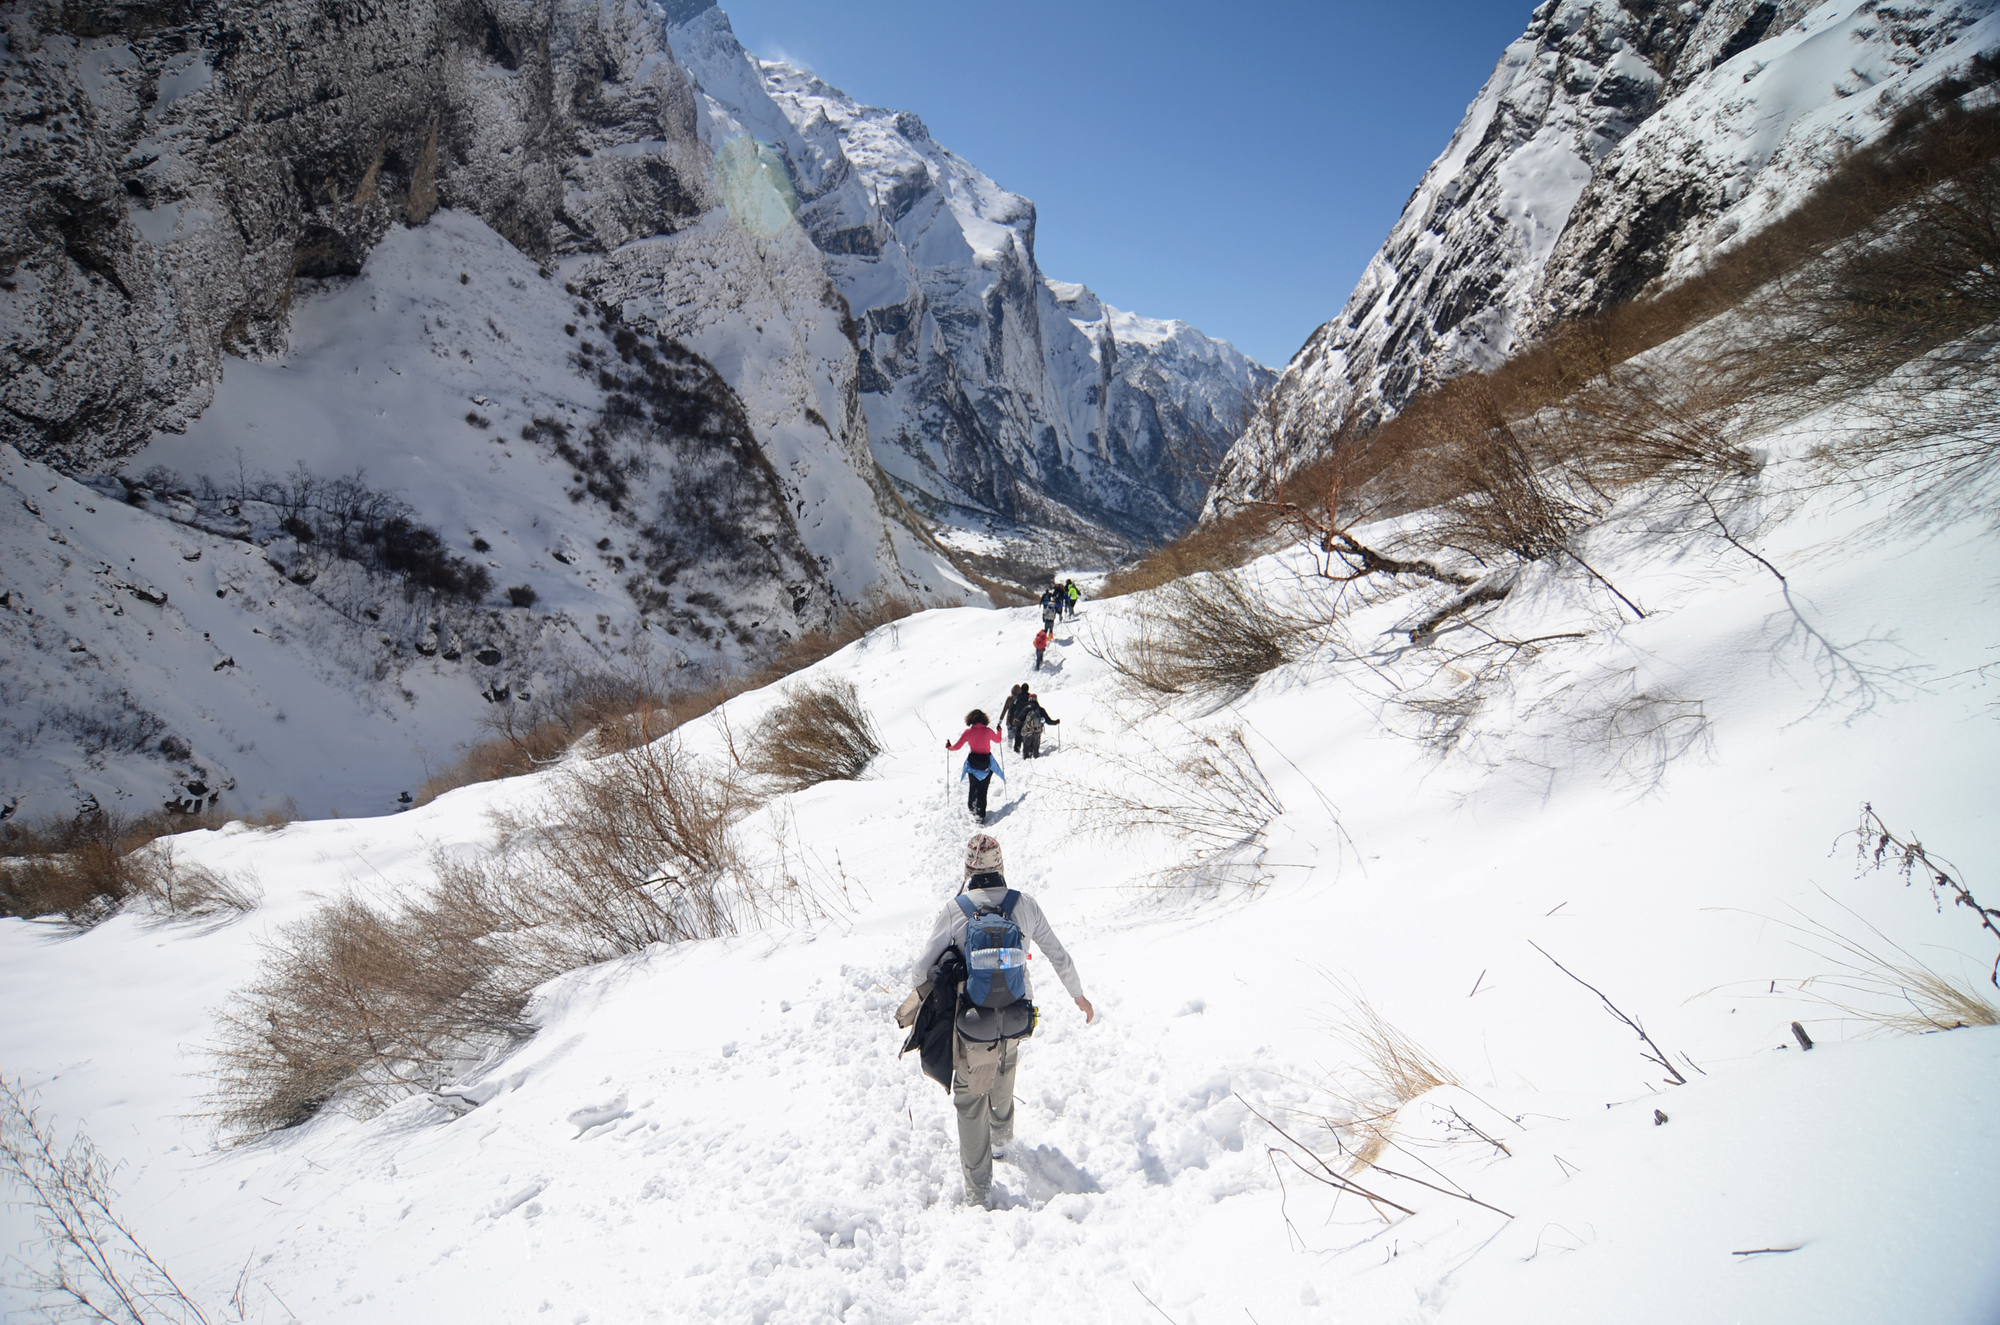 Trekking through the snowy gorge to ABC, Nepal - By Mountain People